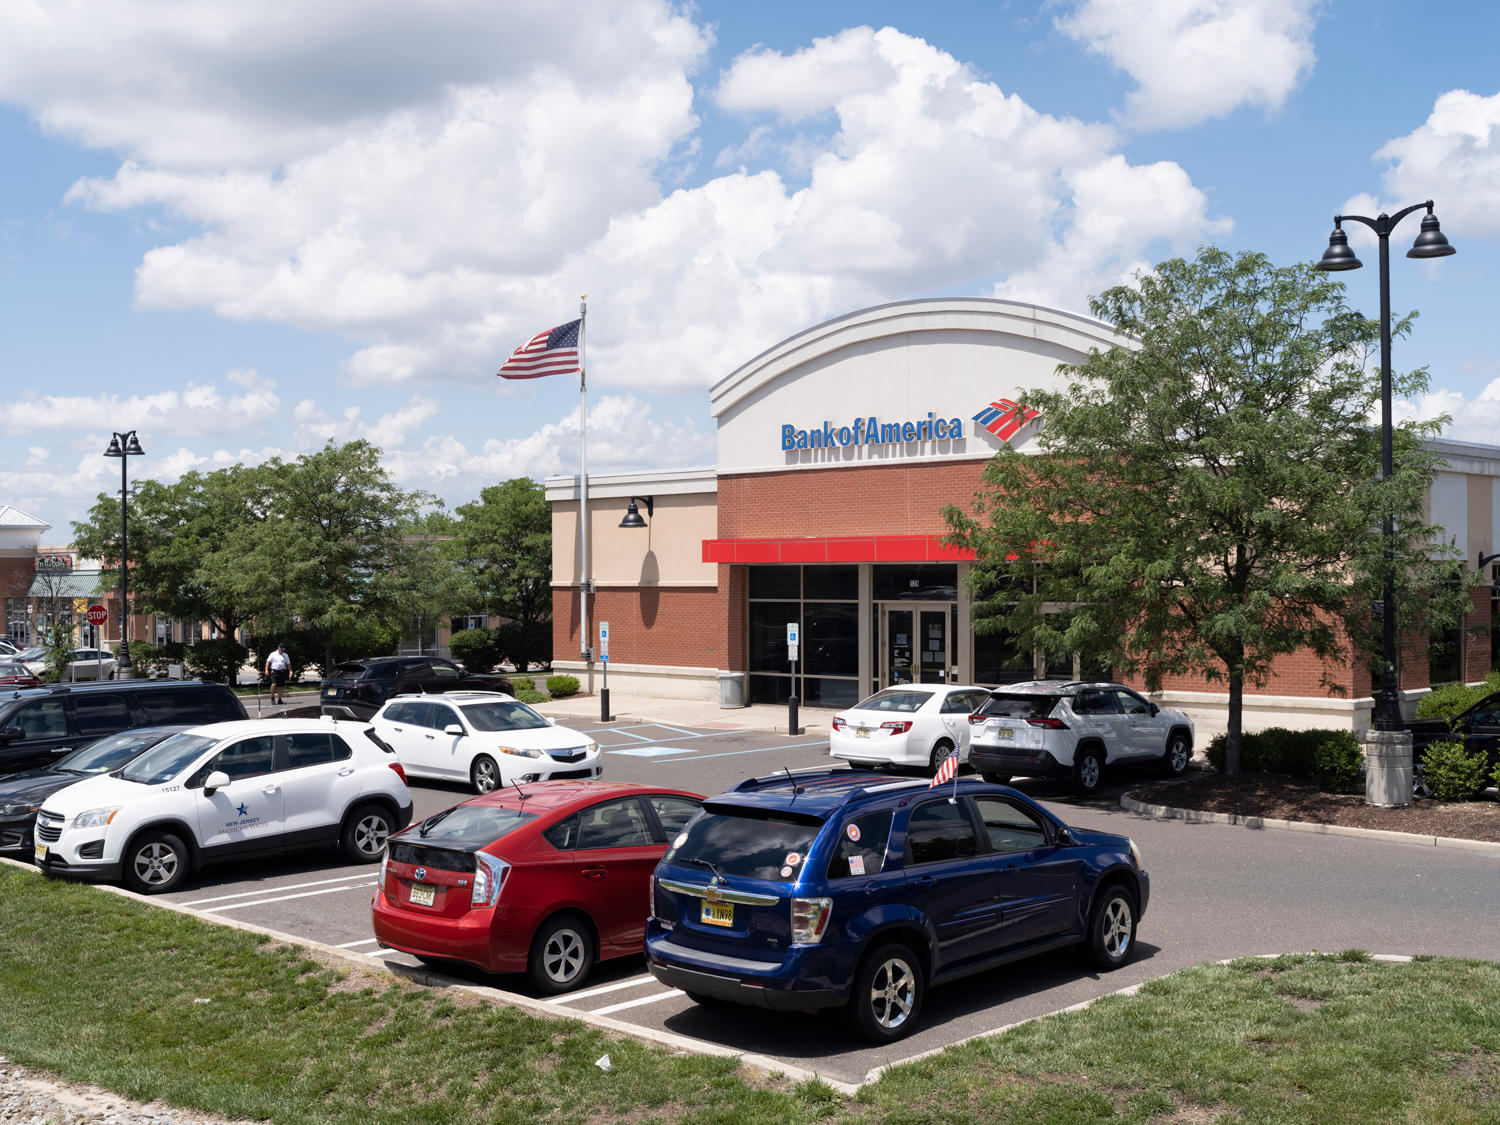 Bank of America at The Shoppes at Cinnaminson Shopping Center